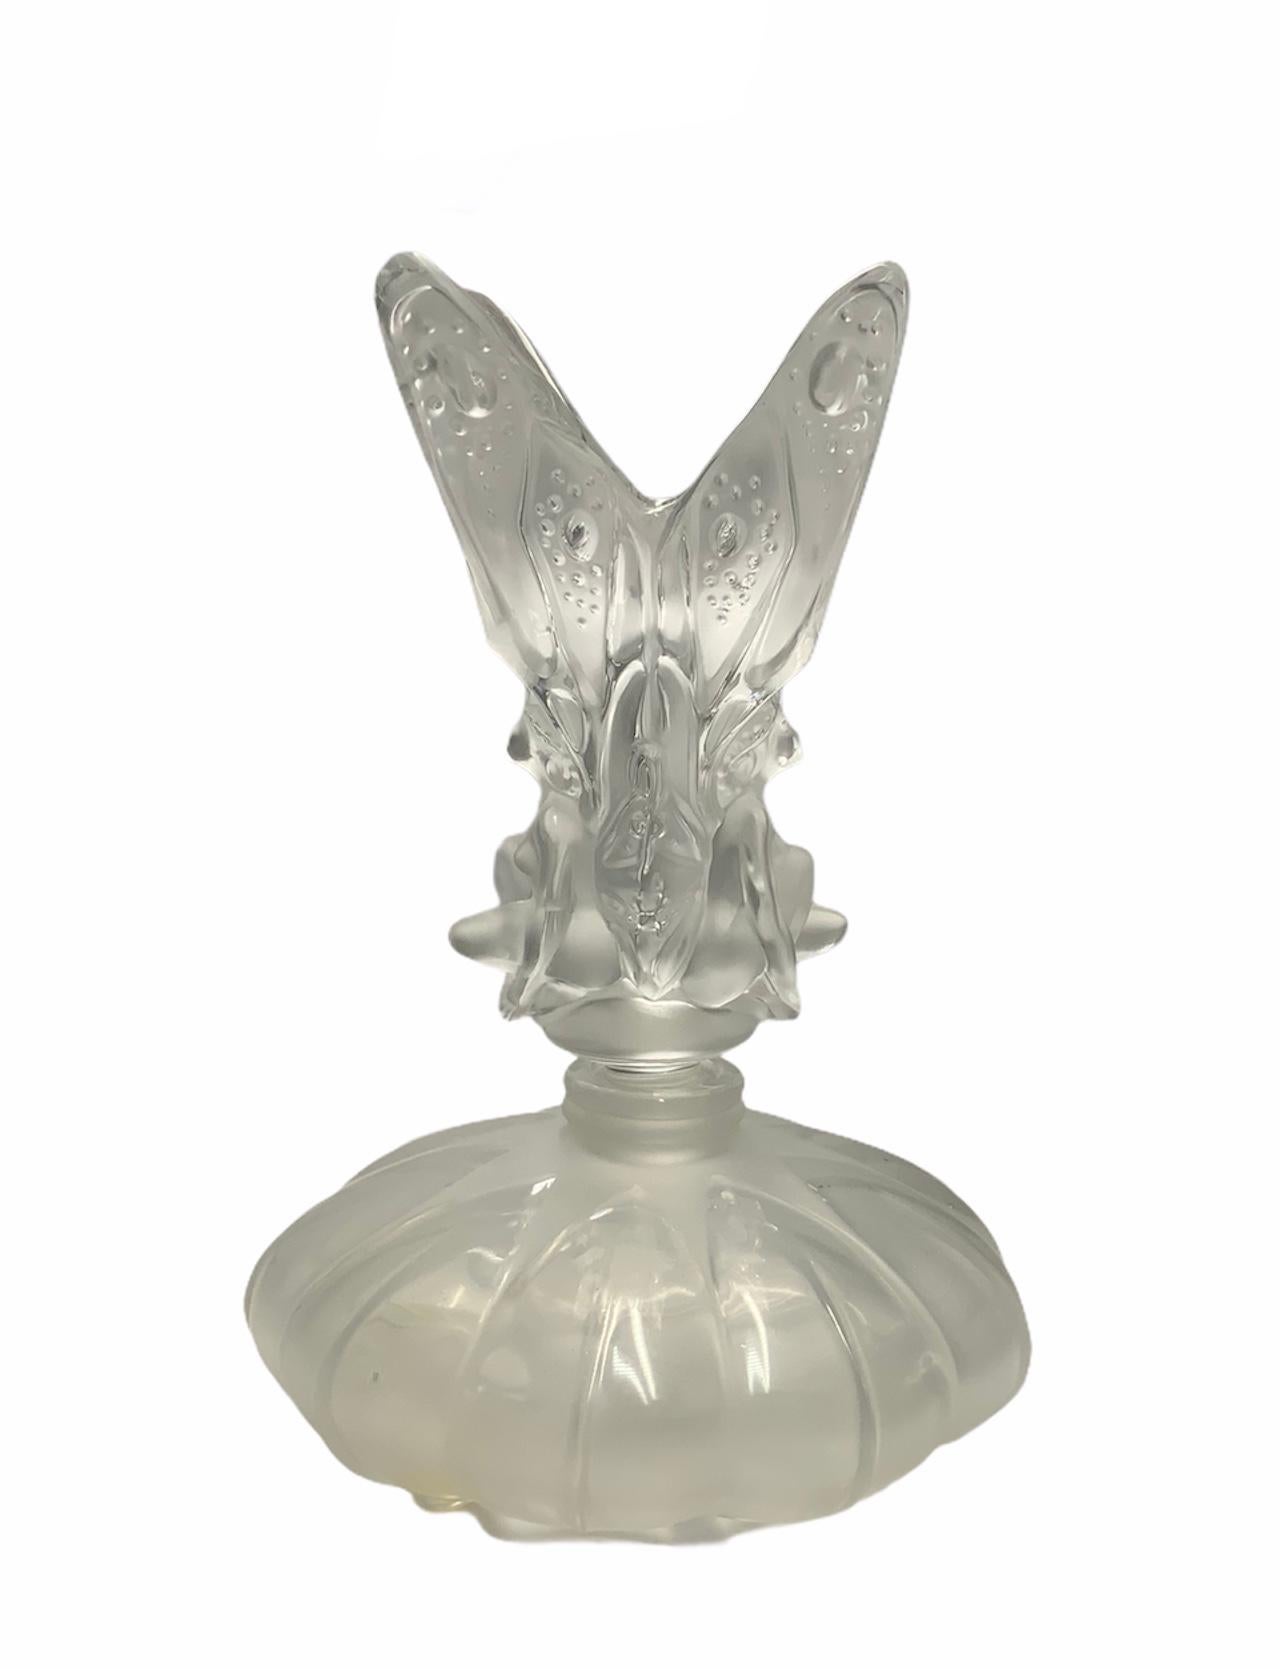 Molded Lalique Crystal “Les Fees” 'The Fairy' Perfume Bottle